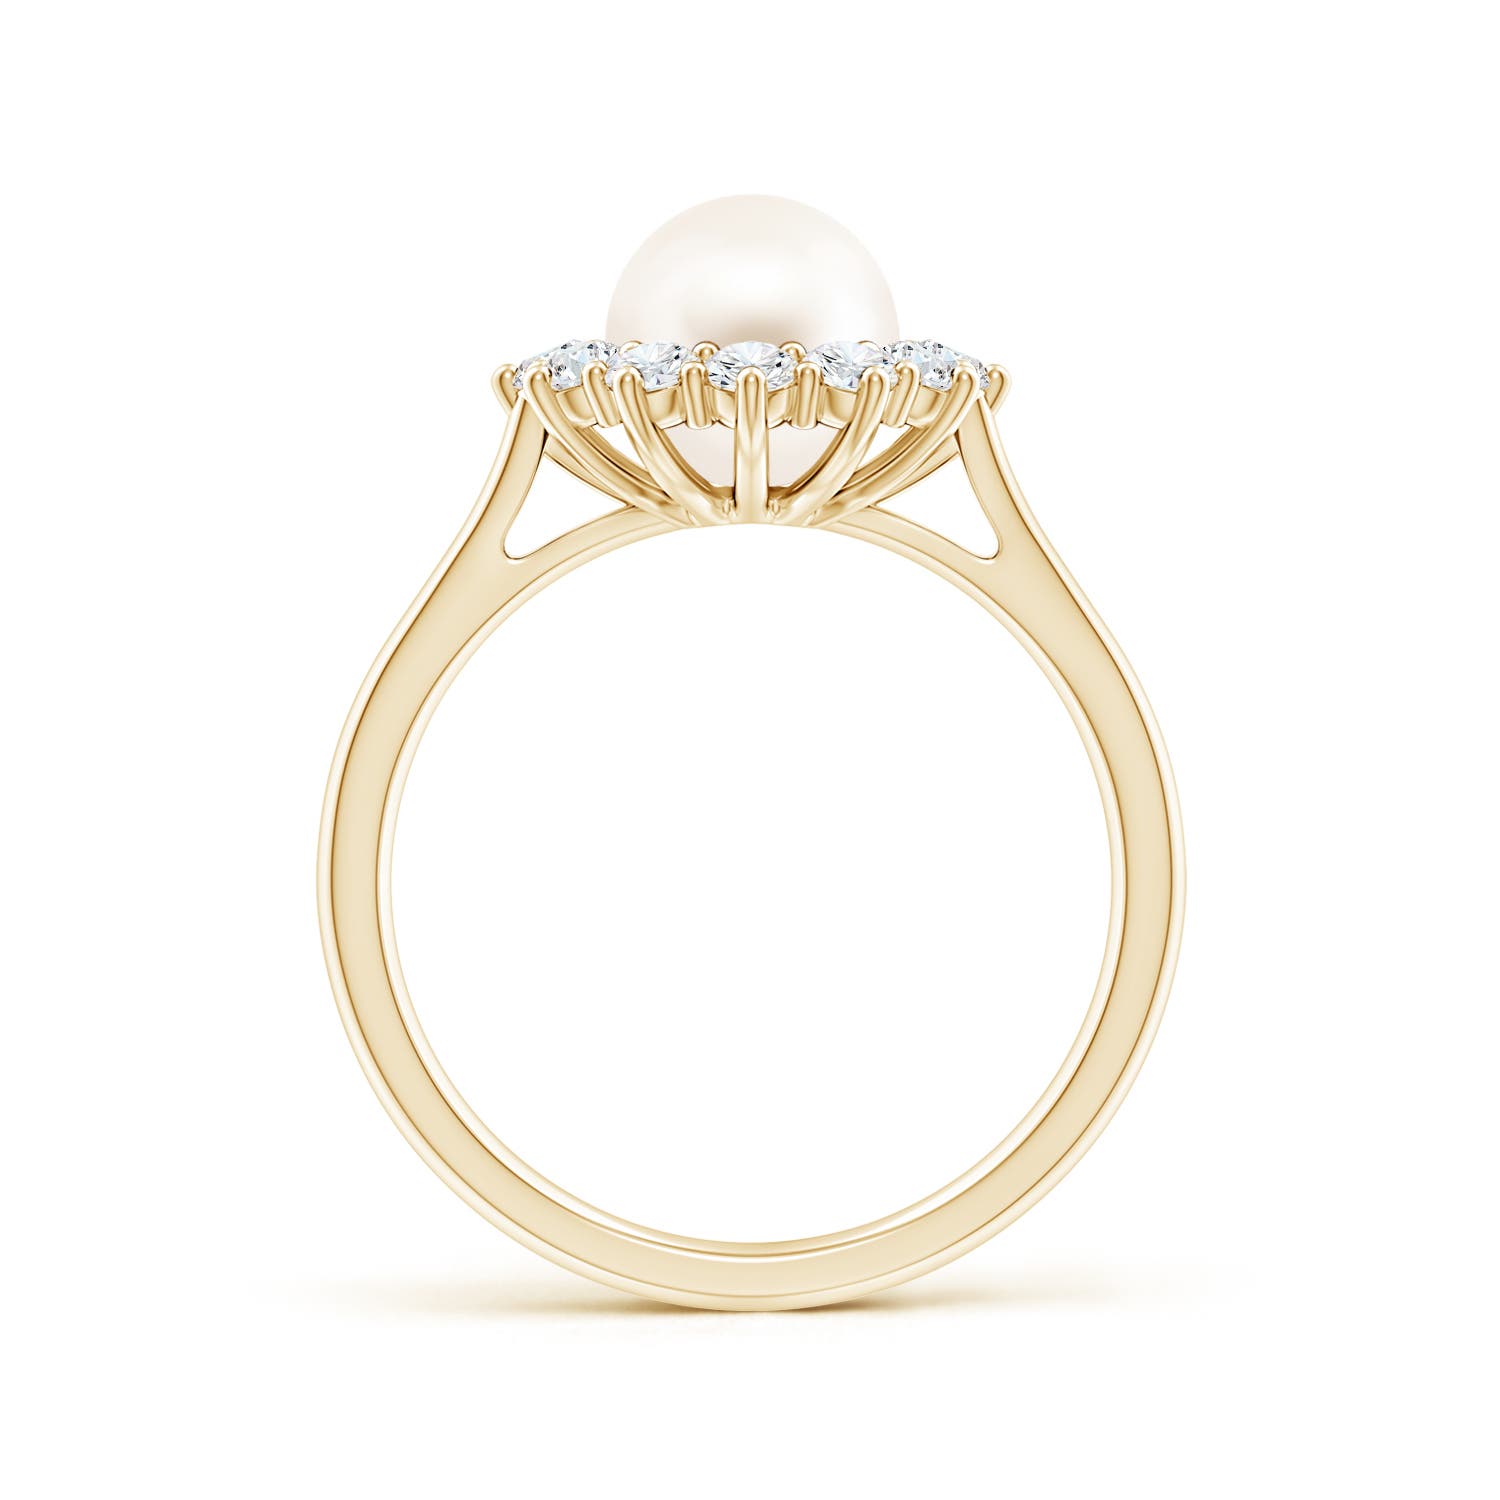 AAA / 3 CT / 14 KT Yellow Gold